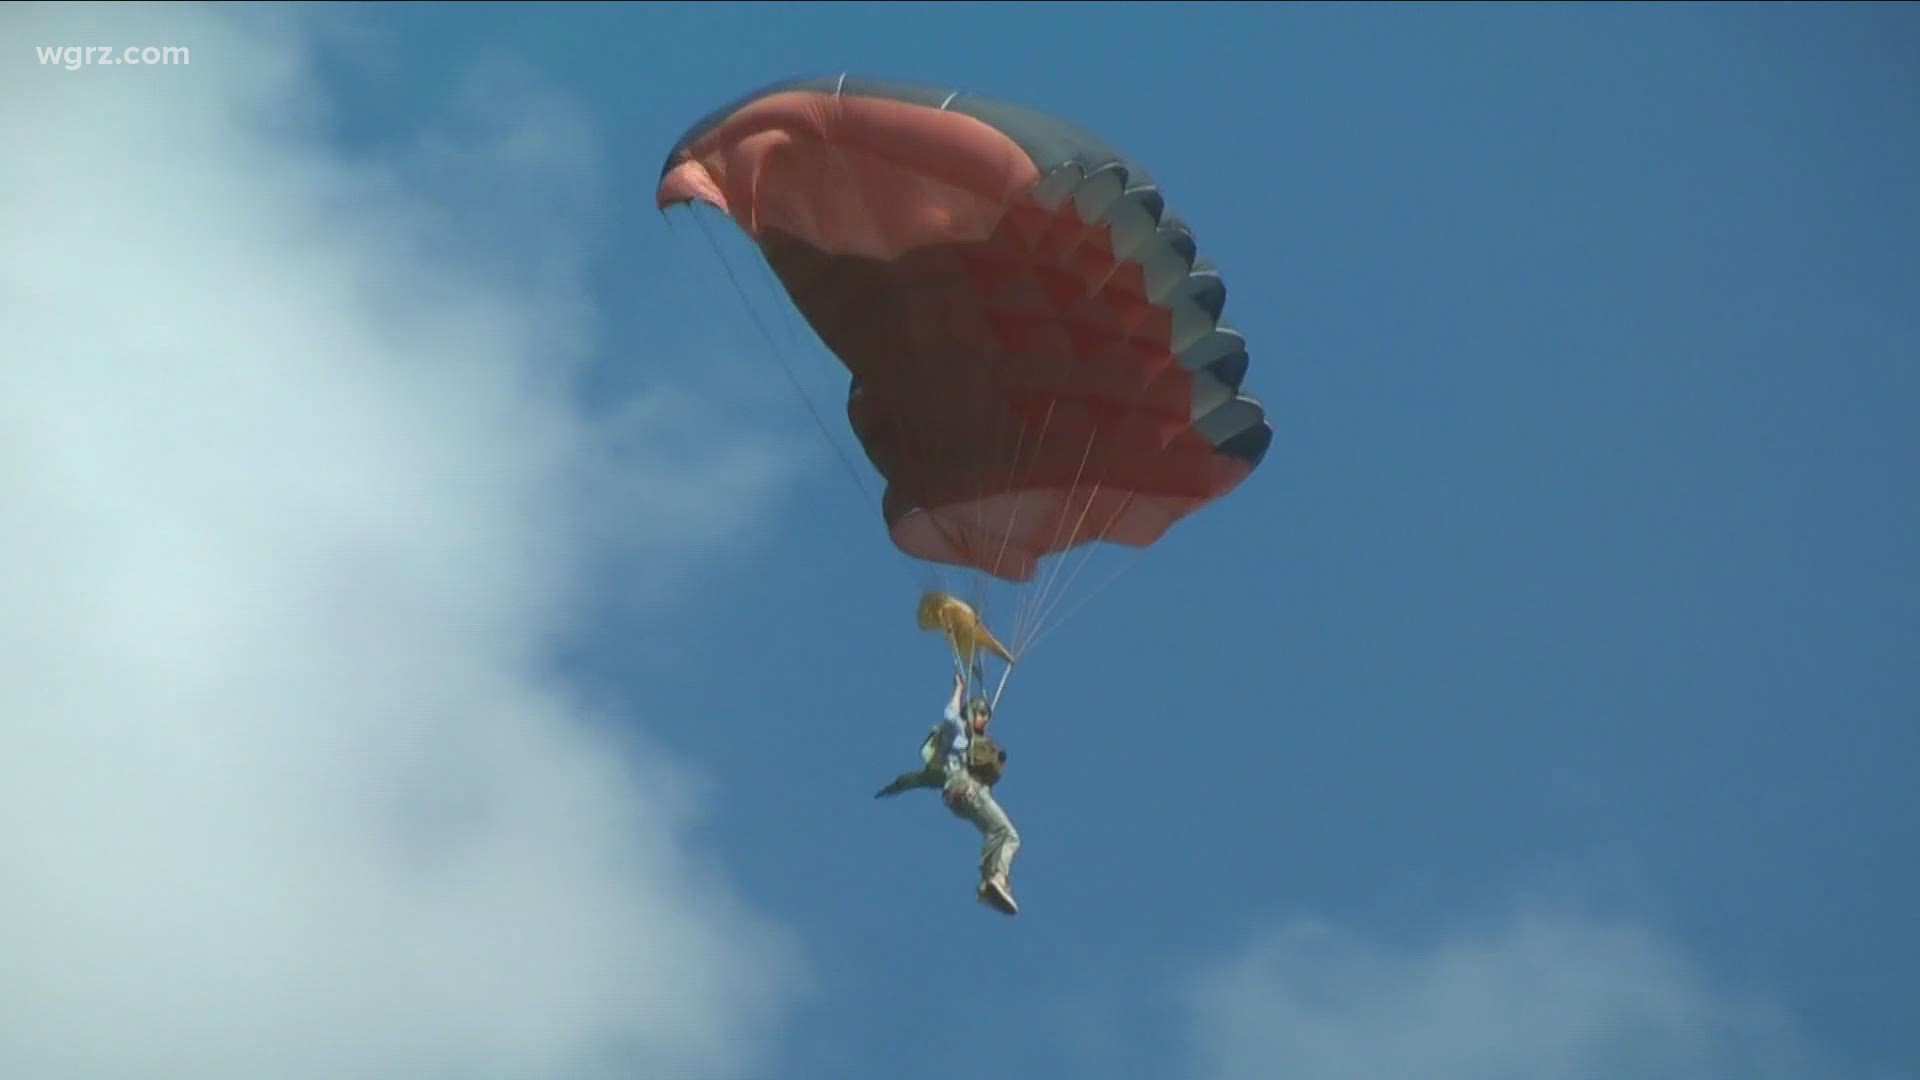 A group of skydivers will make what they say is the world's first skydive over Niagara Falls.